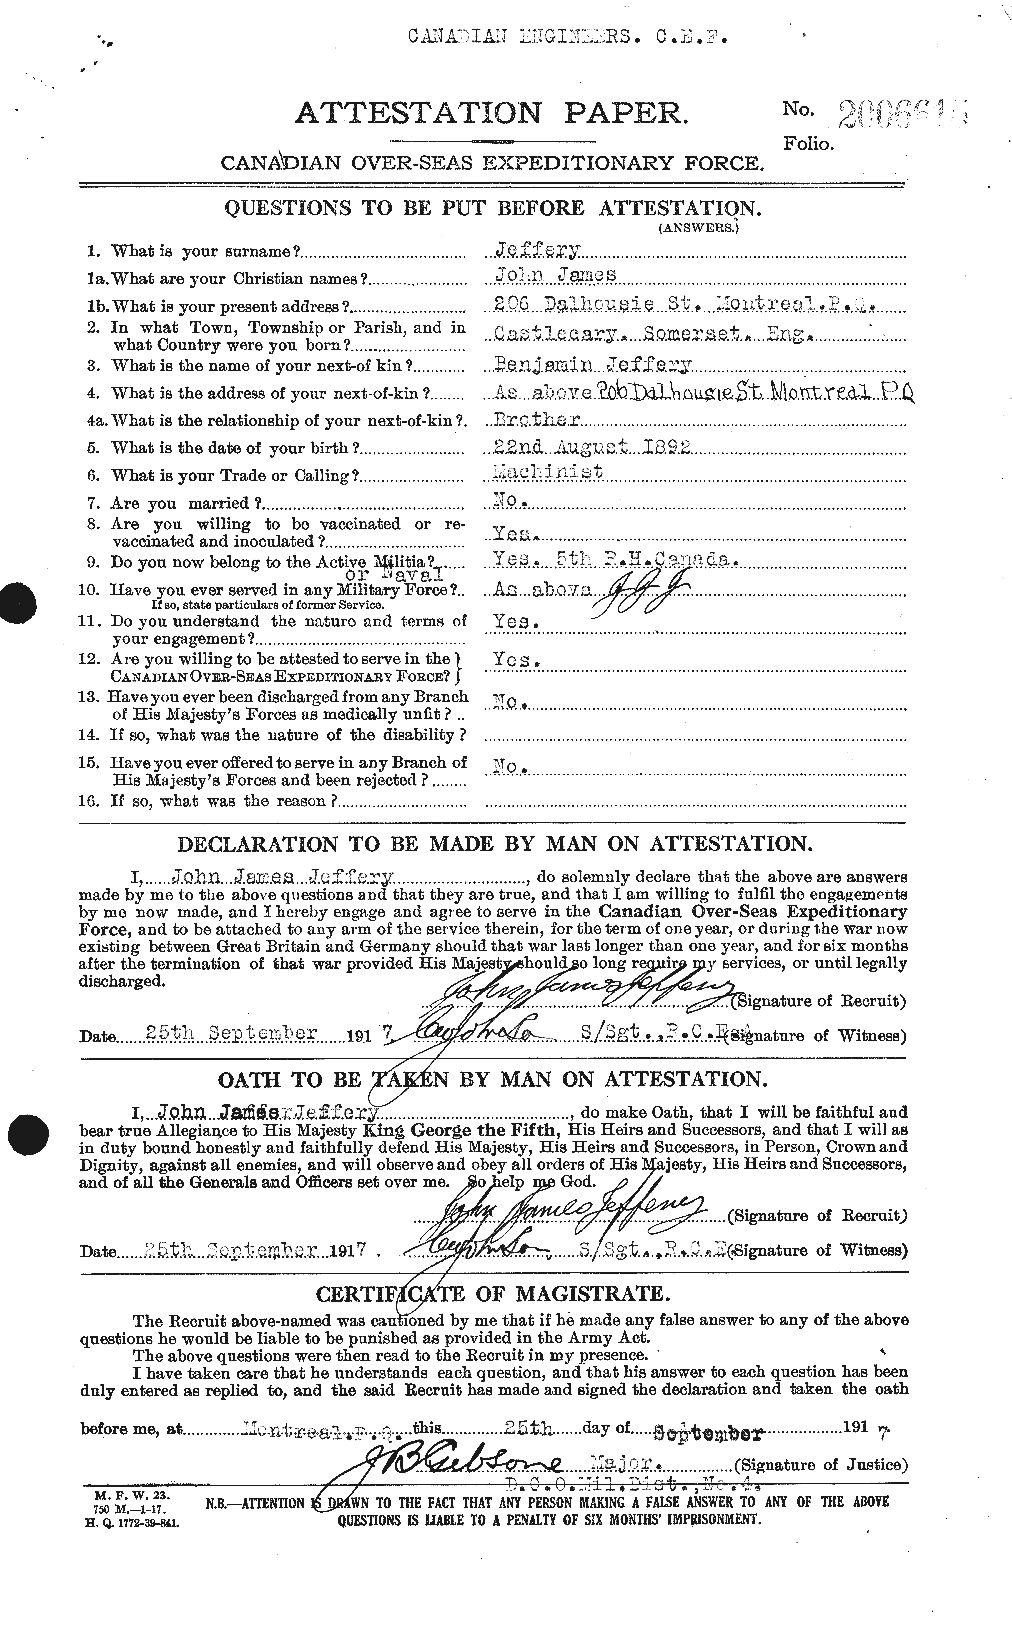 Personnel Records of the First World War - CEF 417780a